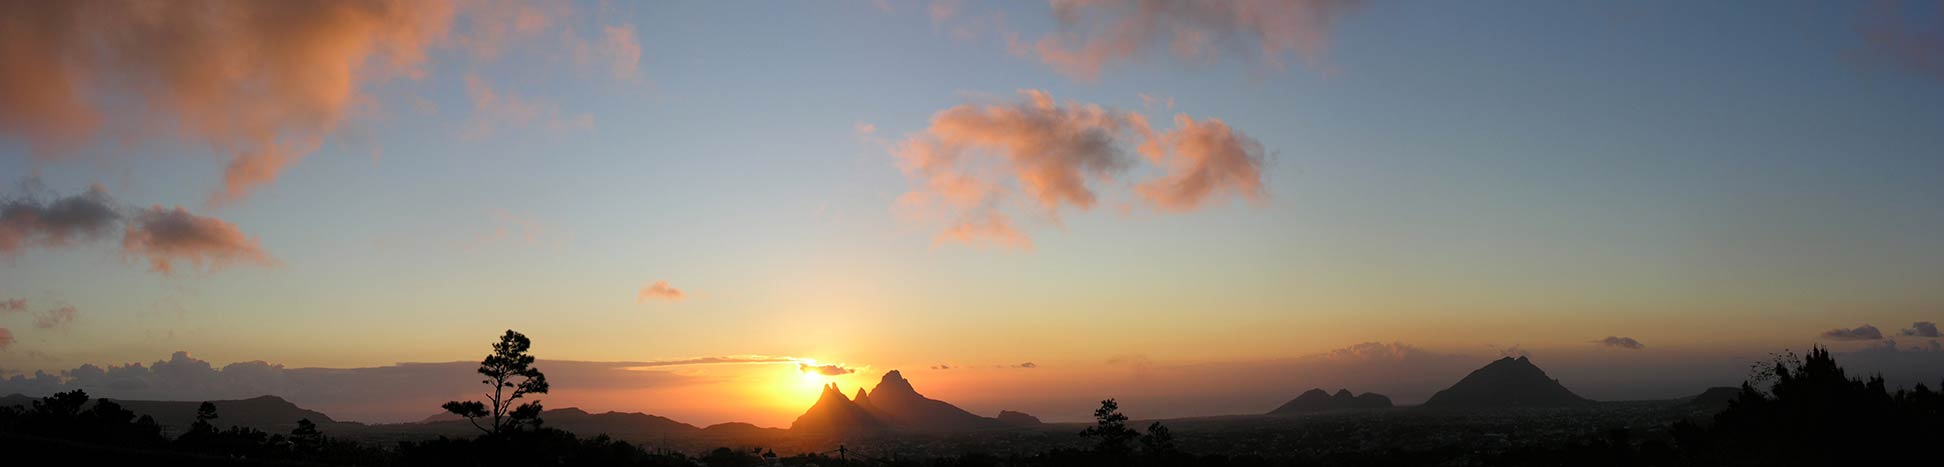 Sunset seen from the Trou au Cerf crater on Mauritius